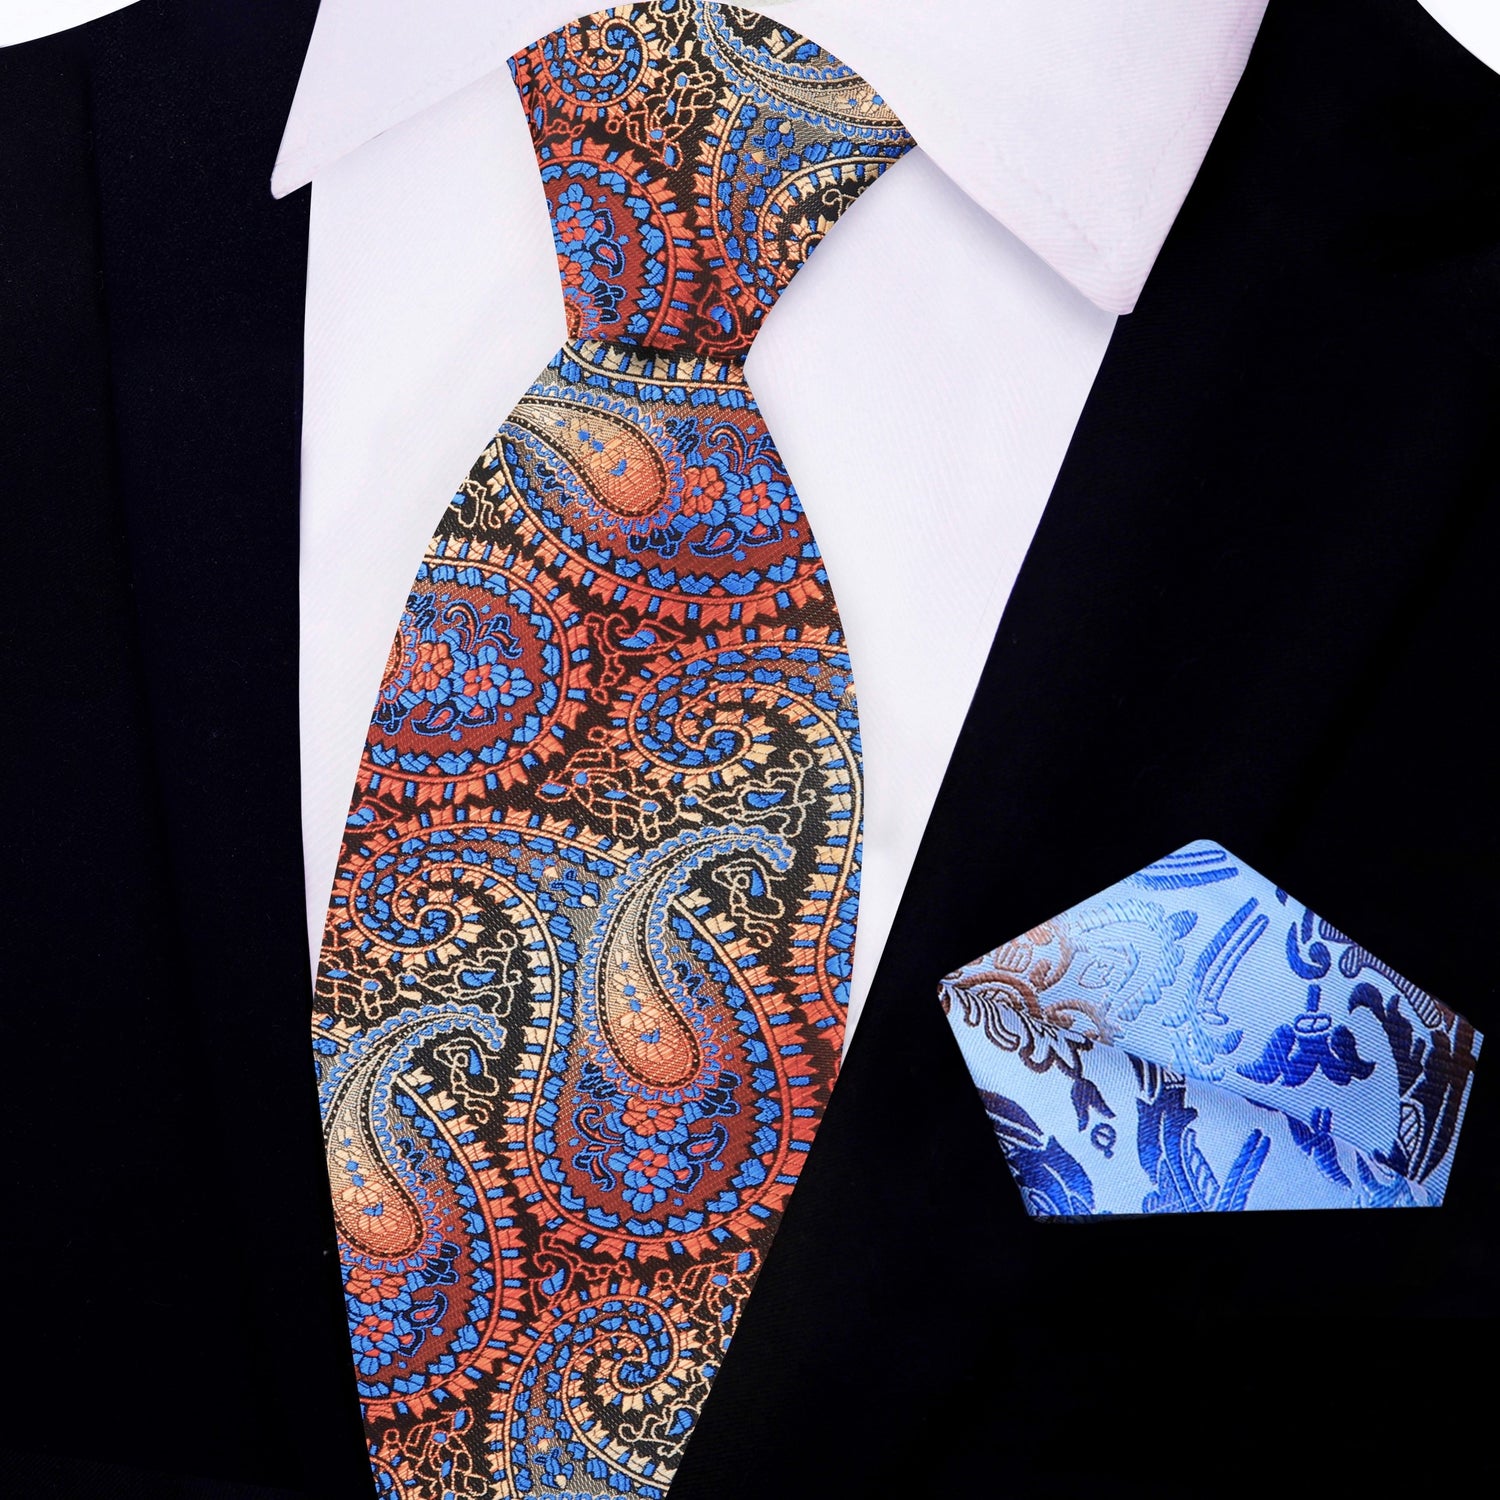 View 2: Brown, Red, Orange, Light Blue Paisley Tie and Blue Floral Pocket Square